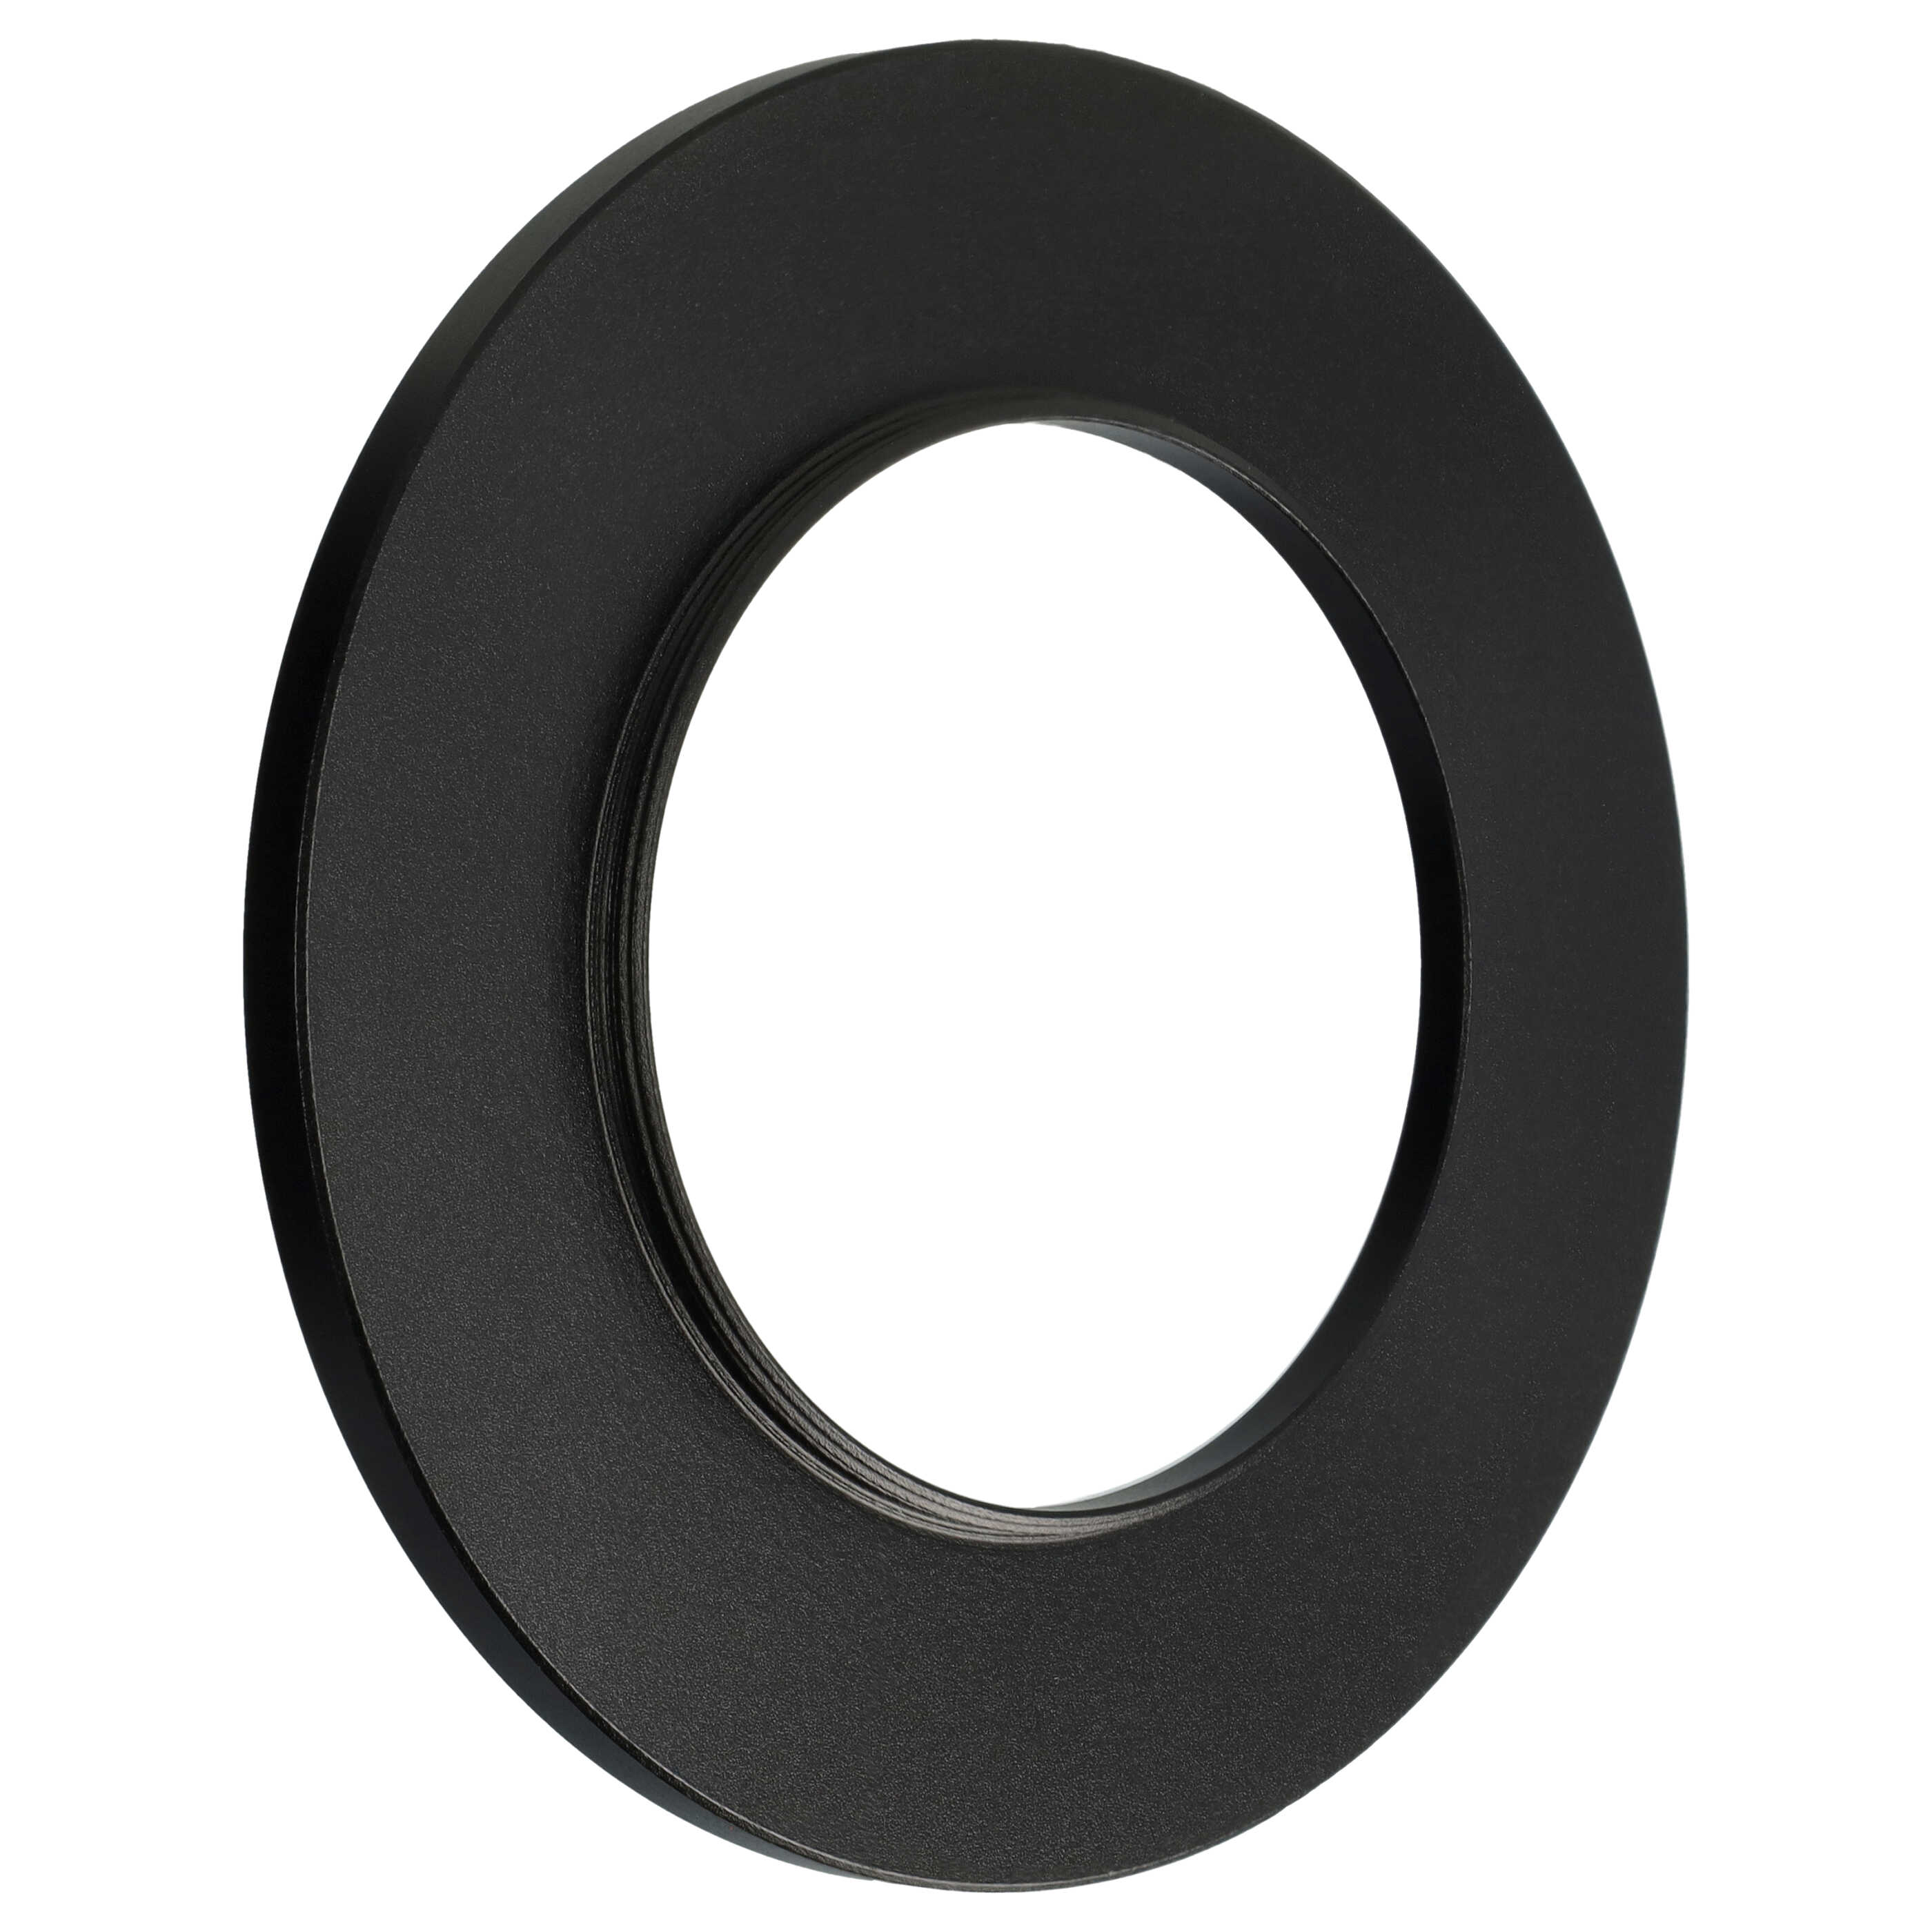 Step-Up Ring Adapter of 52 mm to 82 mmfor various Camera Lens - Filter Adapter